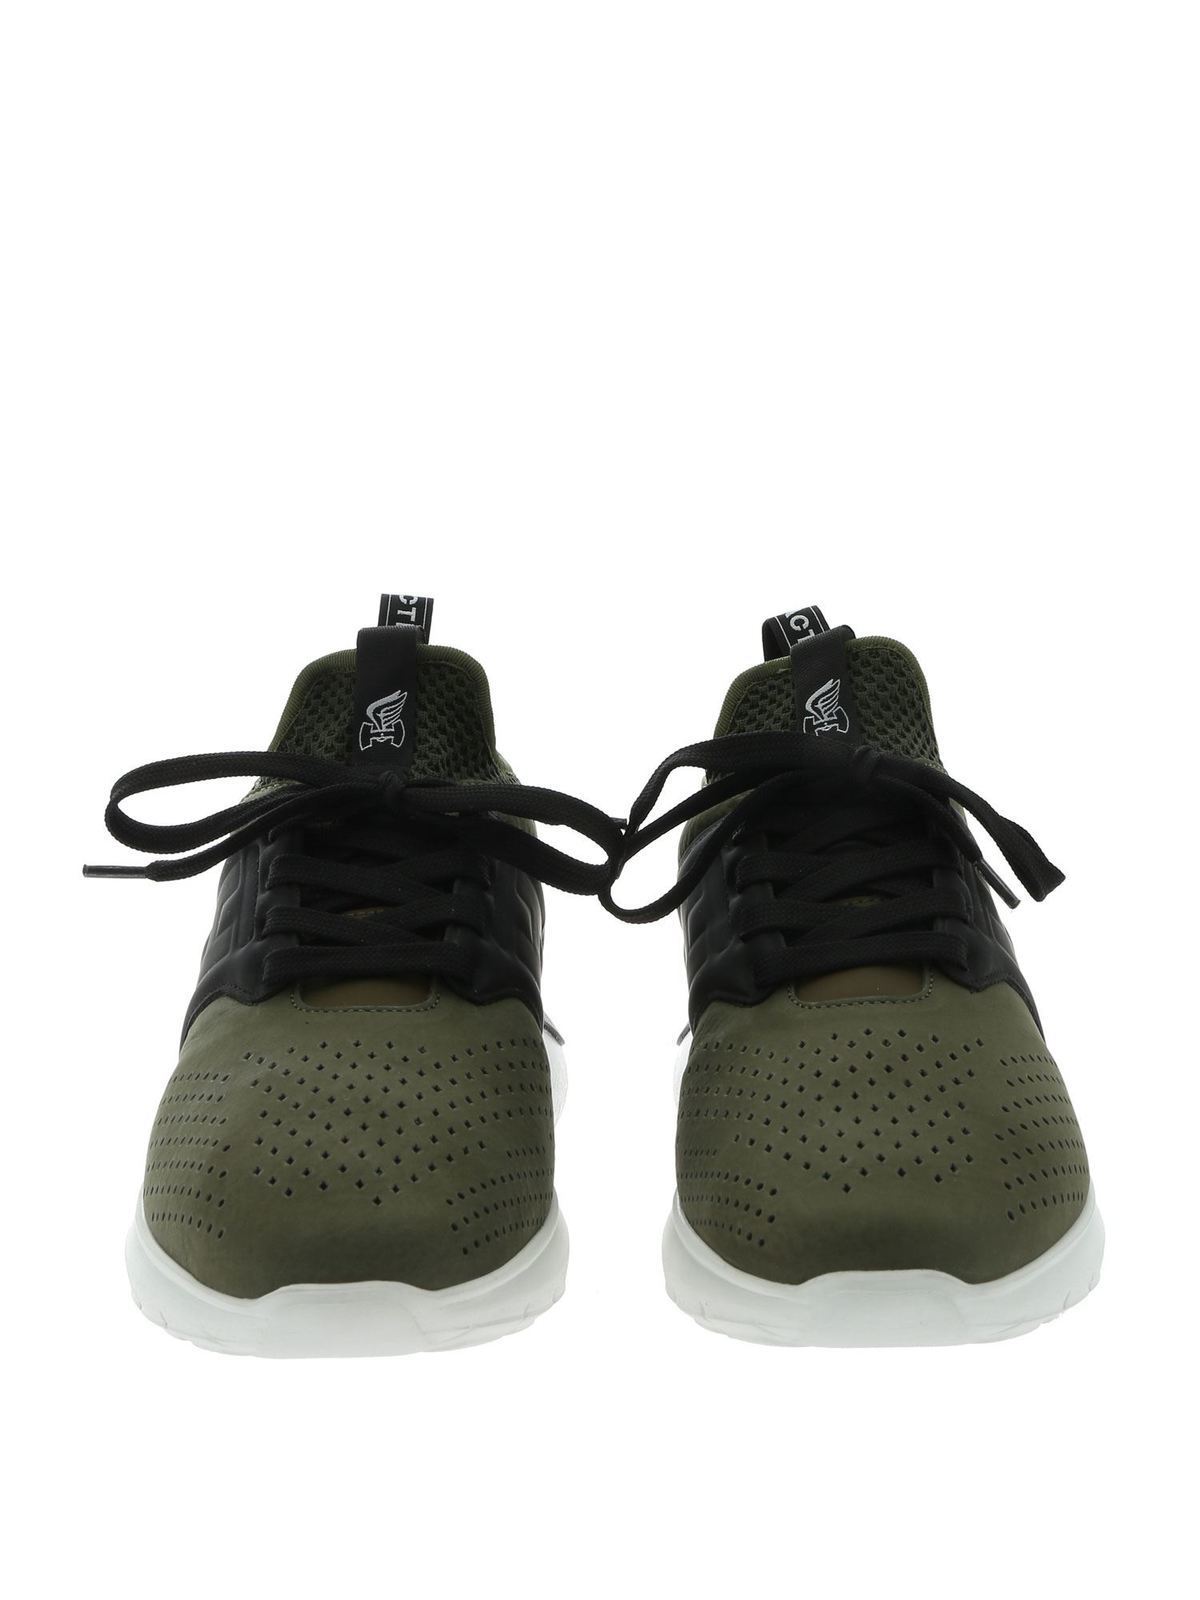 Hogan - Interactive 3 sneakers in Army 